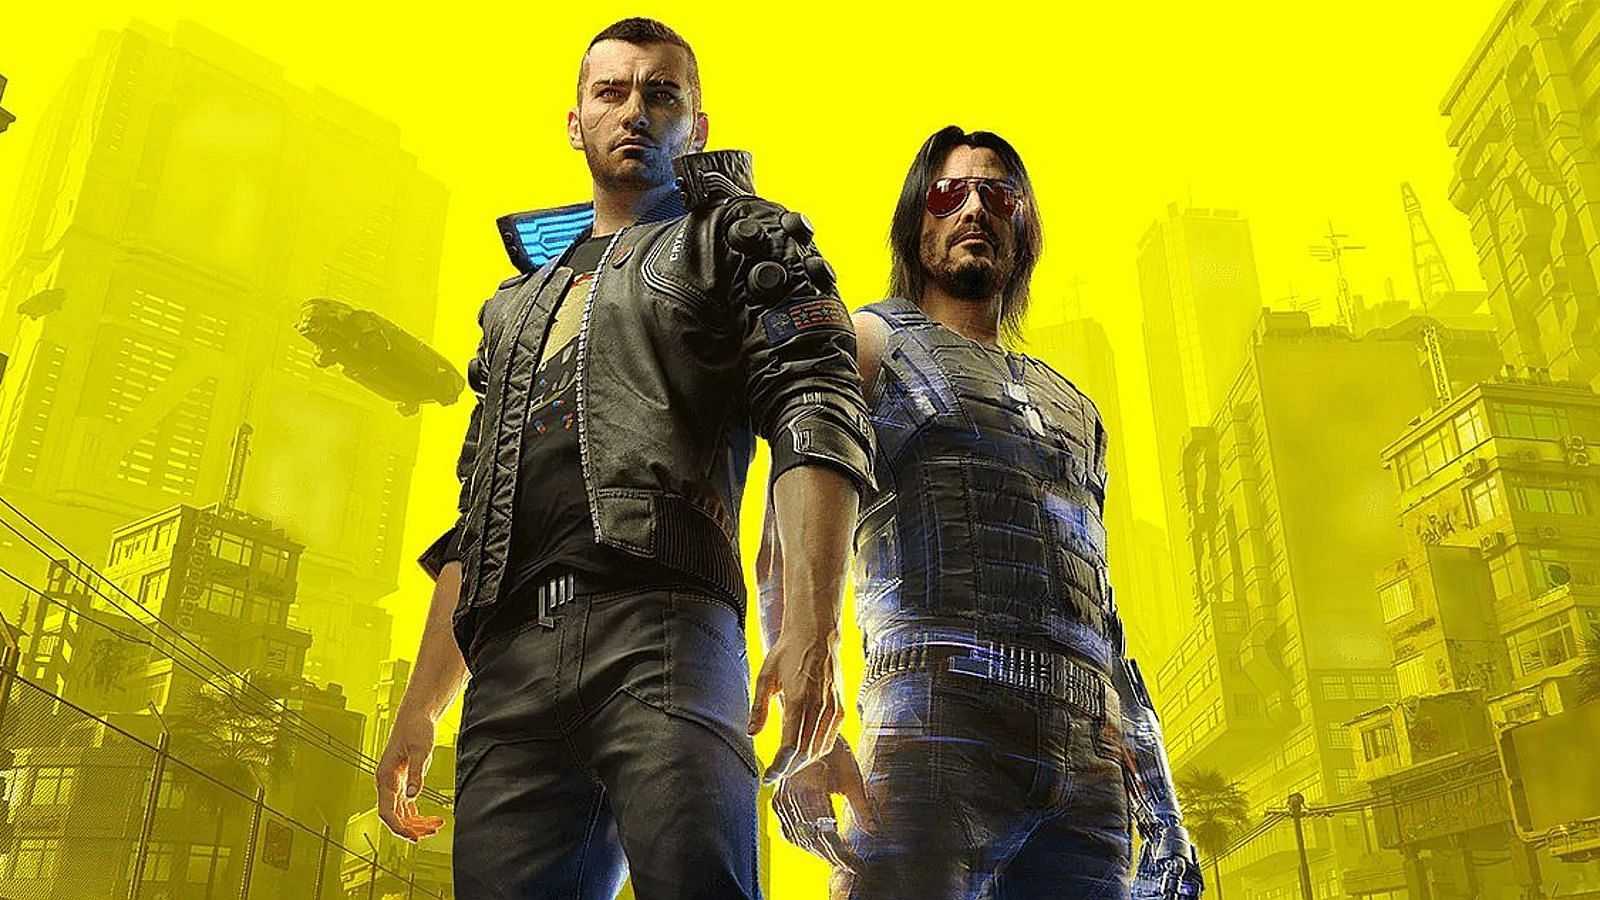 Cyberpunk 2077 is getting a live-action project. (Image via CD Projekt Red)